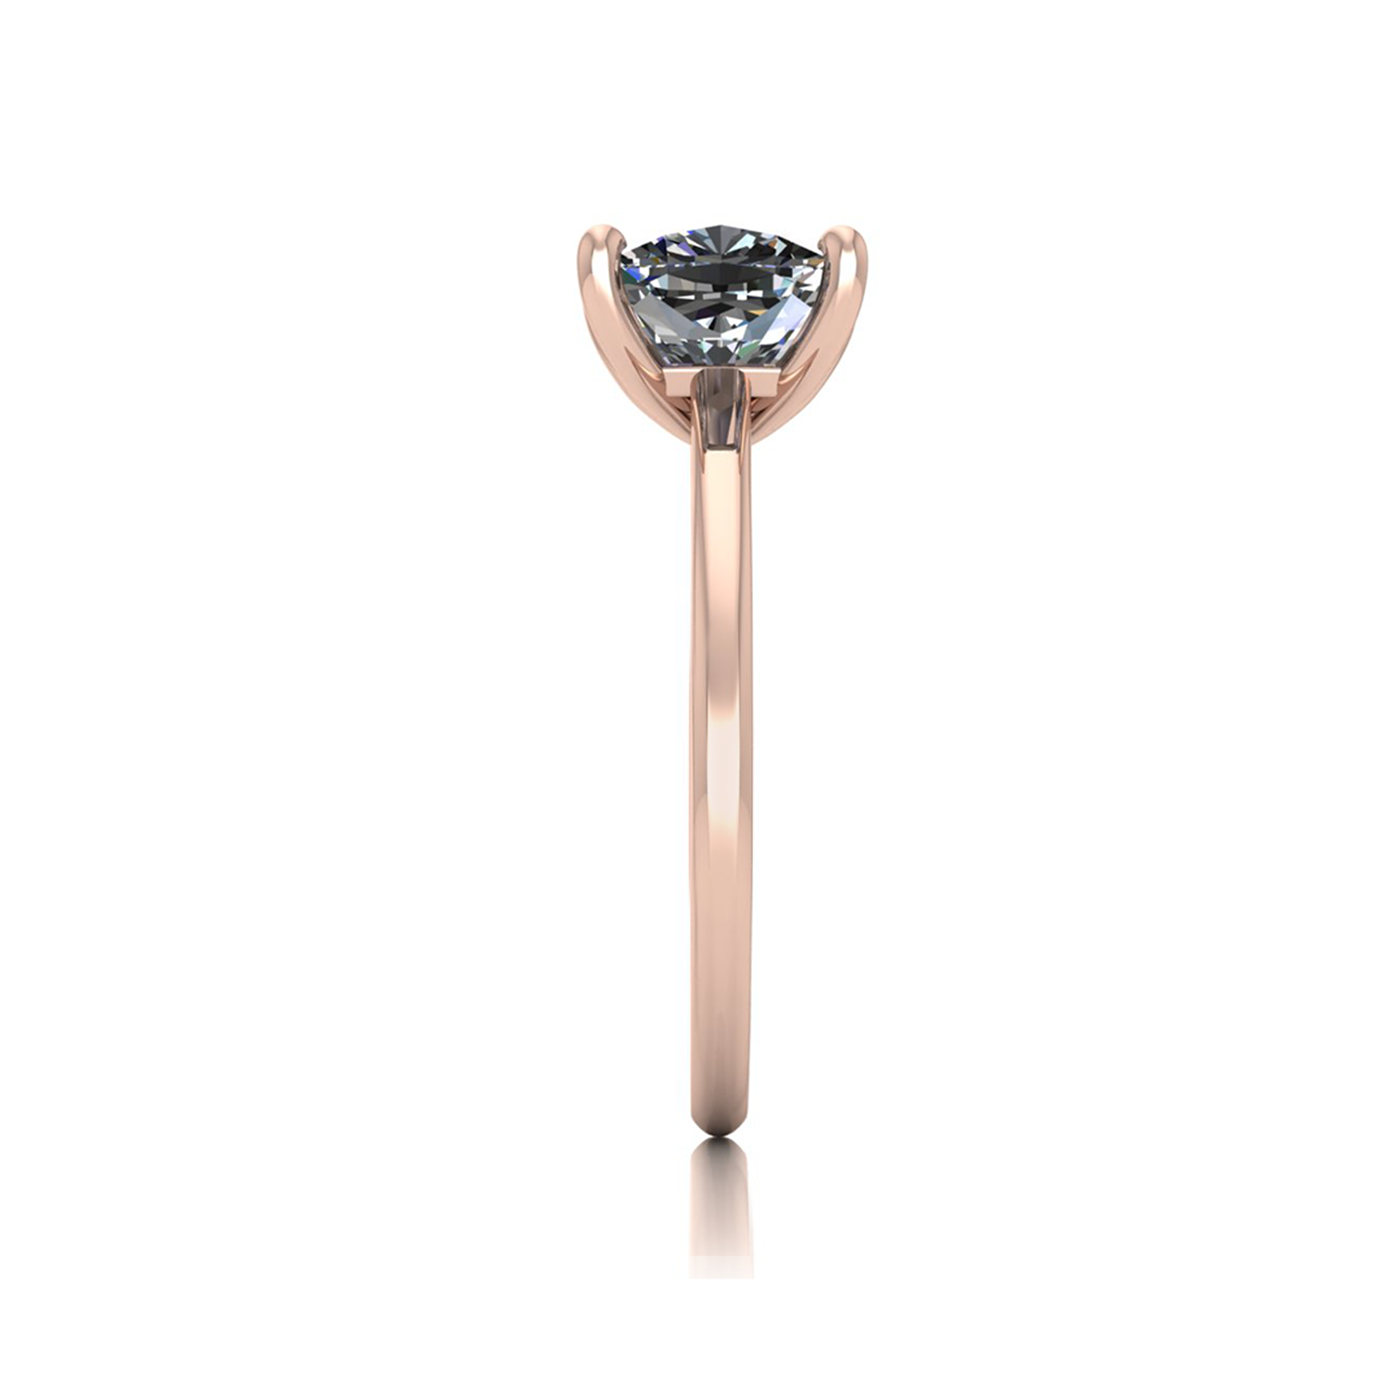 18k rose gold 2.0ct 4 prongs solitaire cushion cut diamond engagement ring with whisper thin band